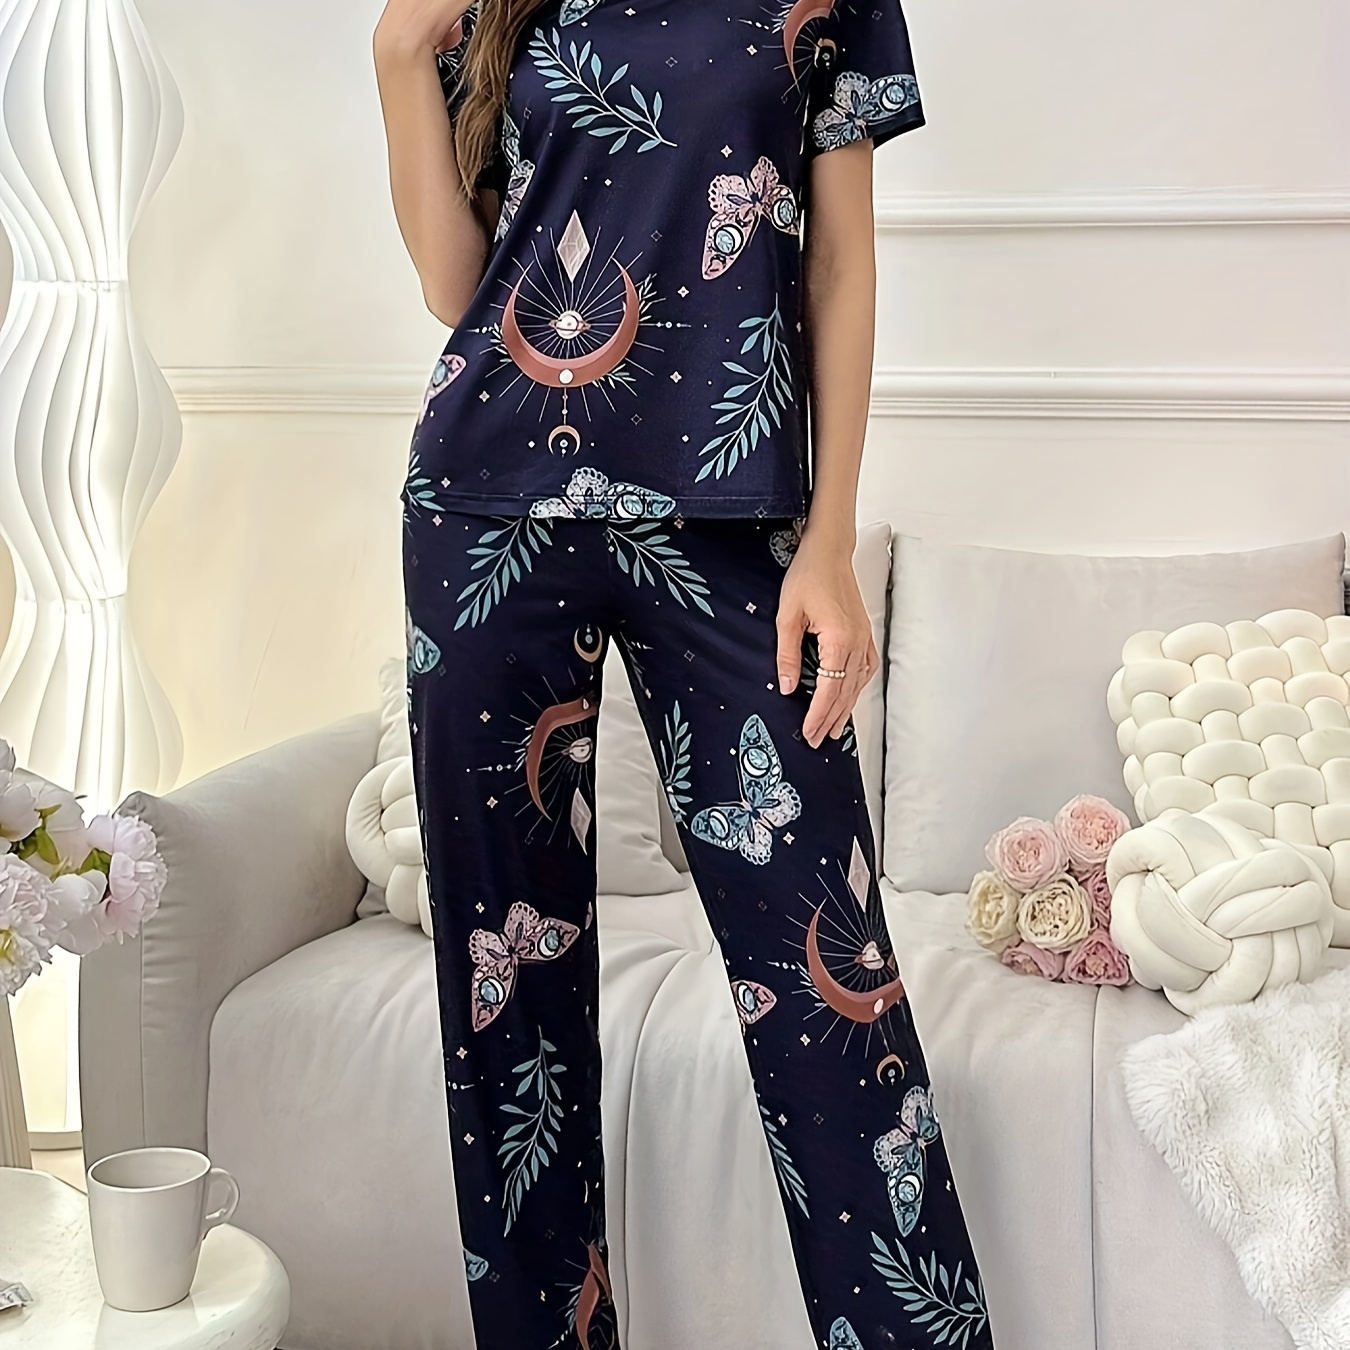 

Women's Butterfly Print Short Sleeve Top And Pants Pyjama Set, Comfortable Loungewear, Casual Style